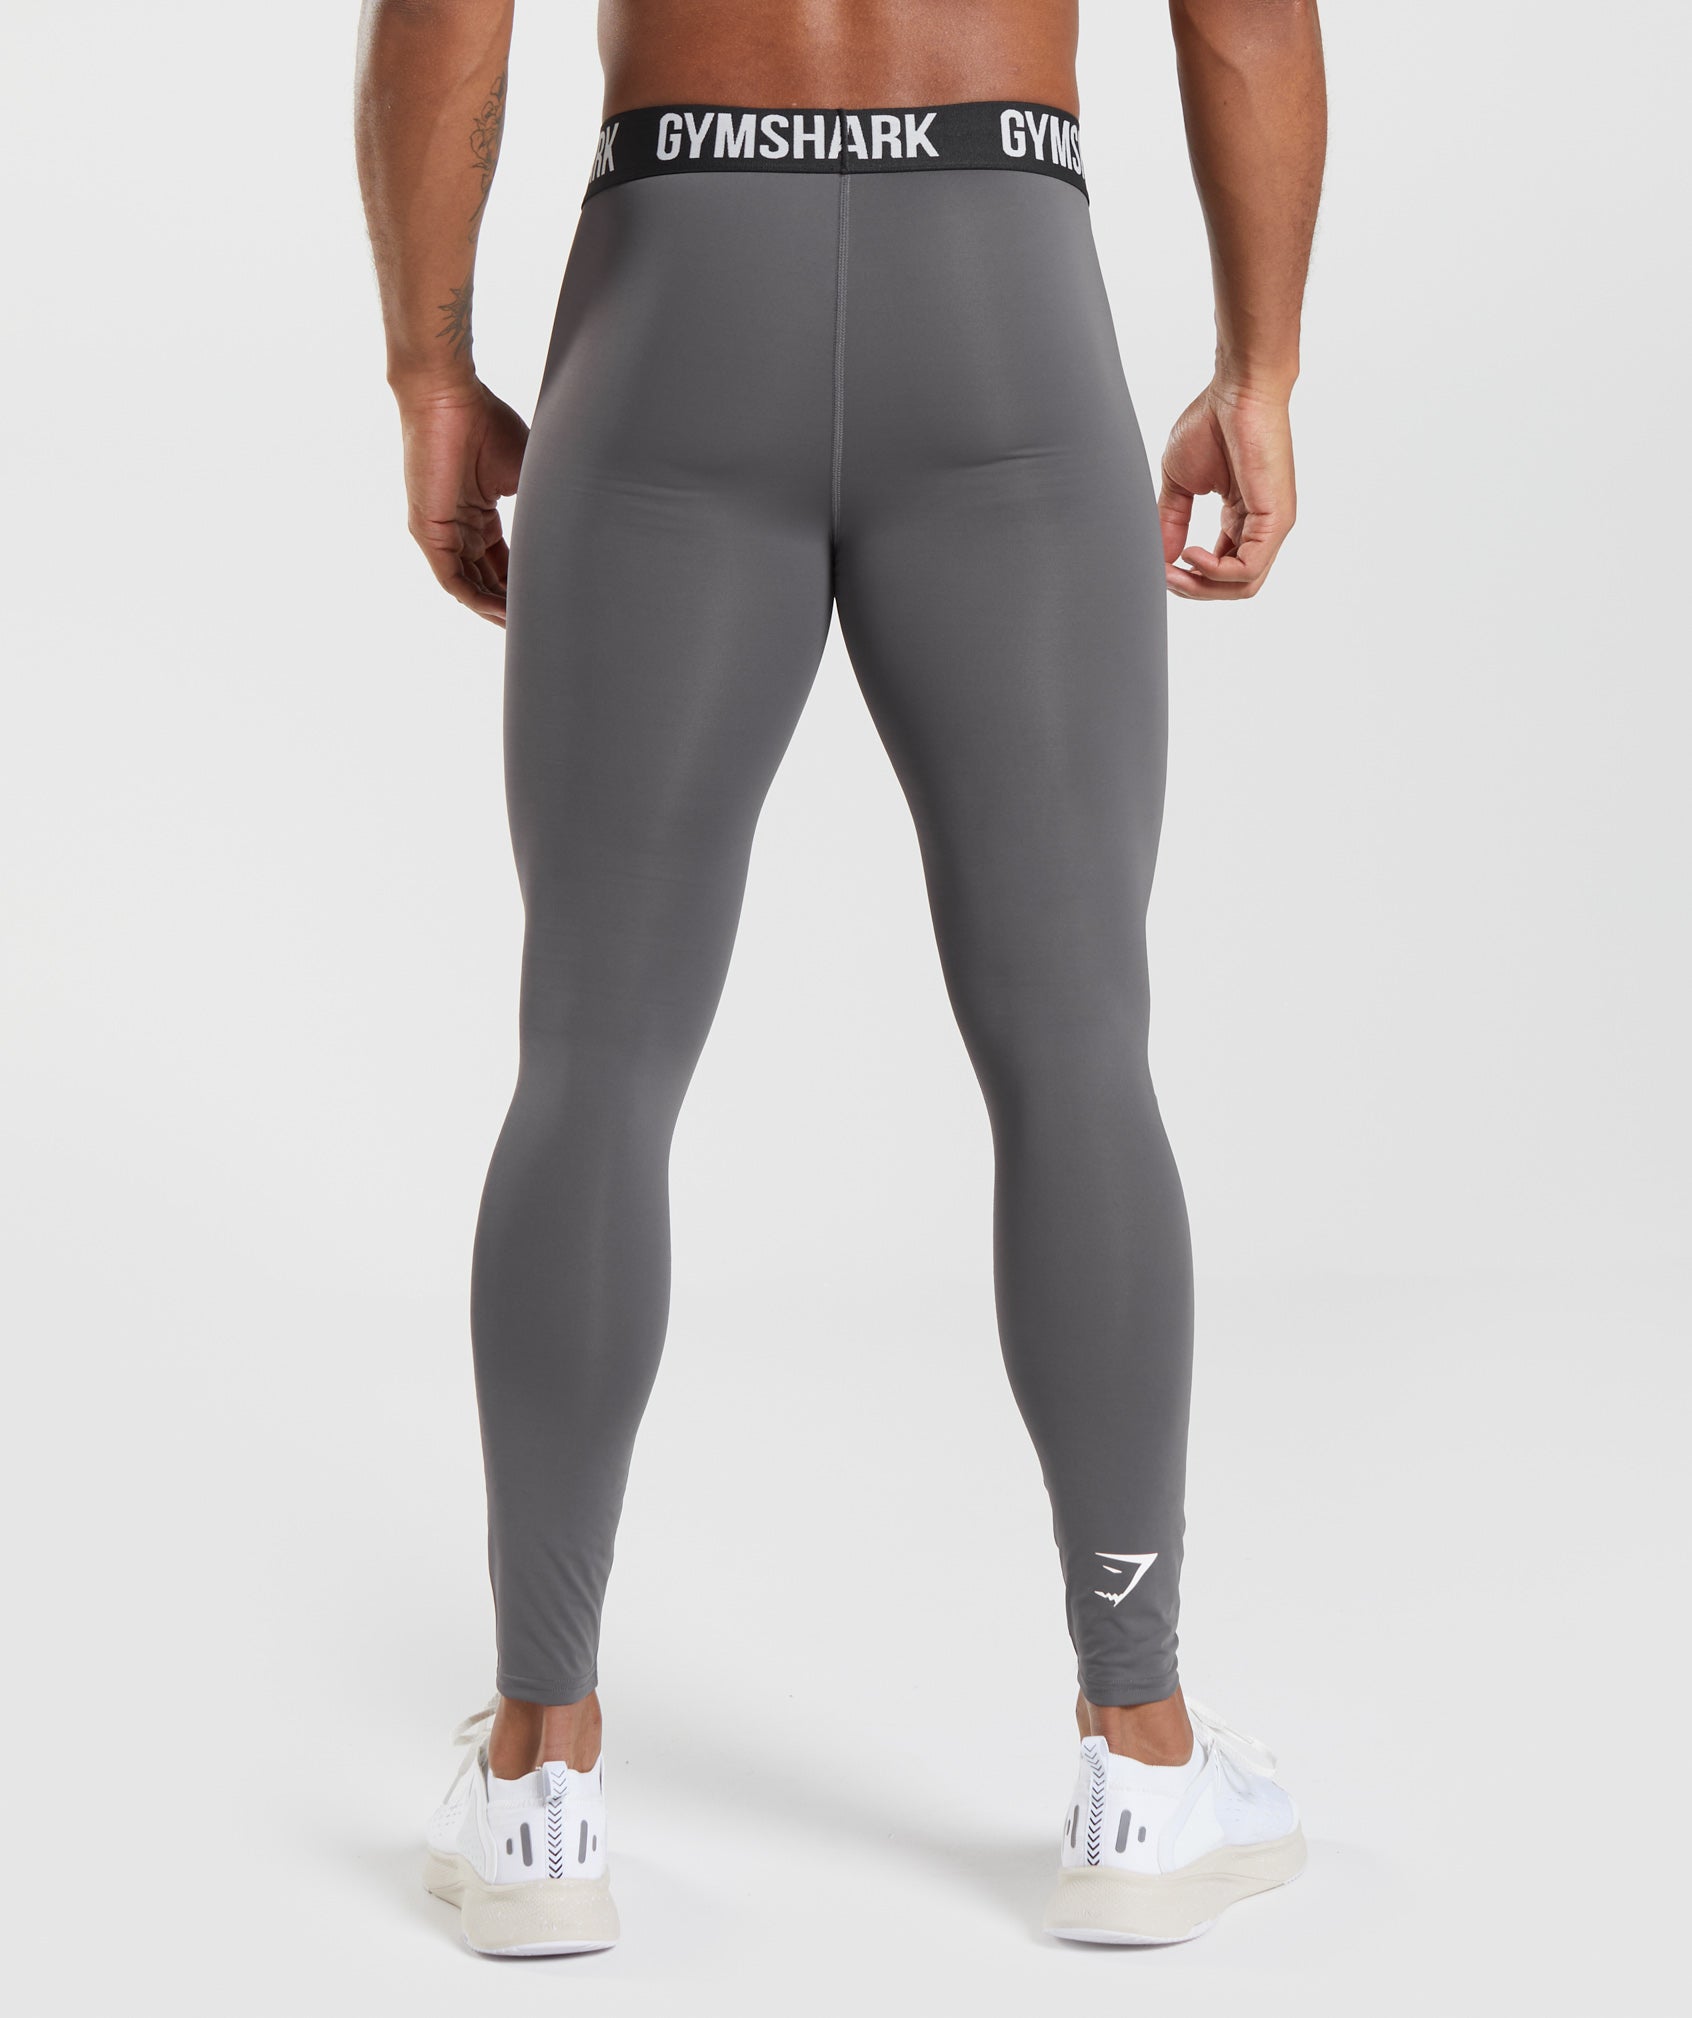 Compression Athletic Tights for Men and Women